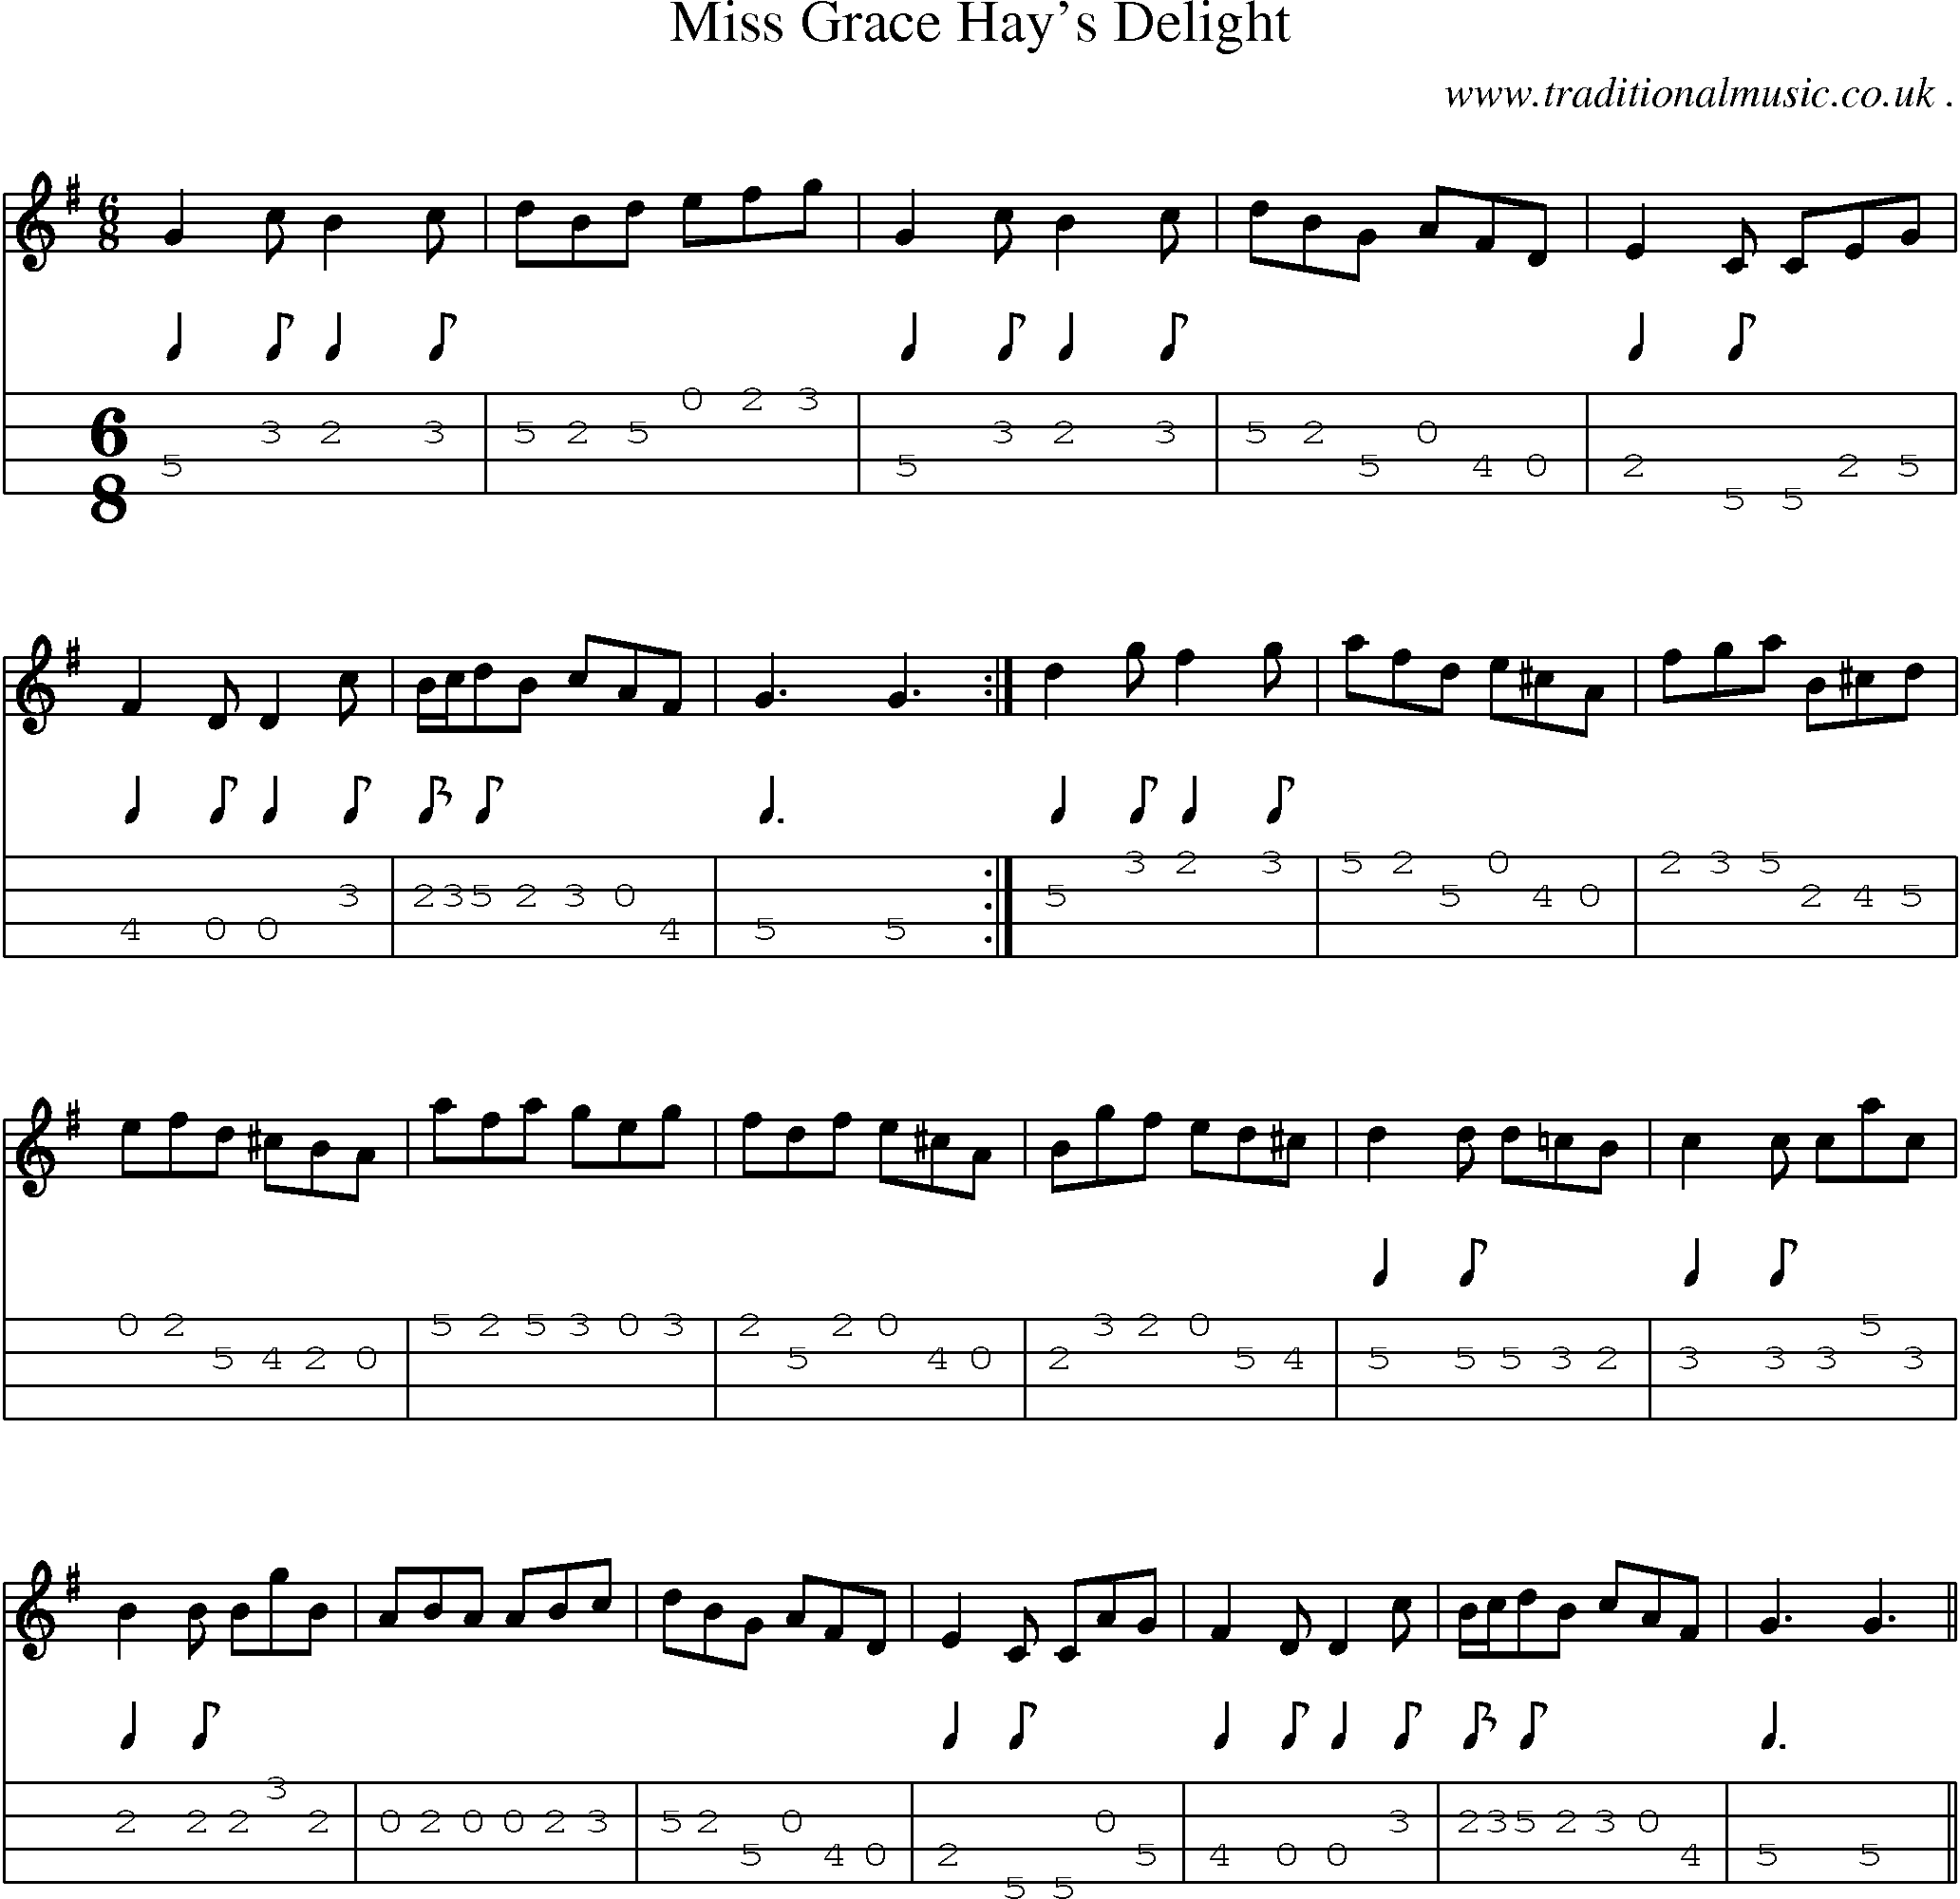 Sheet-Music and Mandolin Tabs for Miss Grace Hays Delight